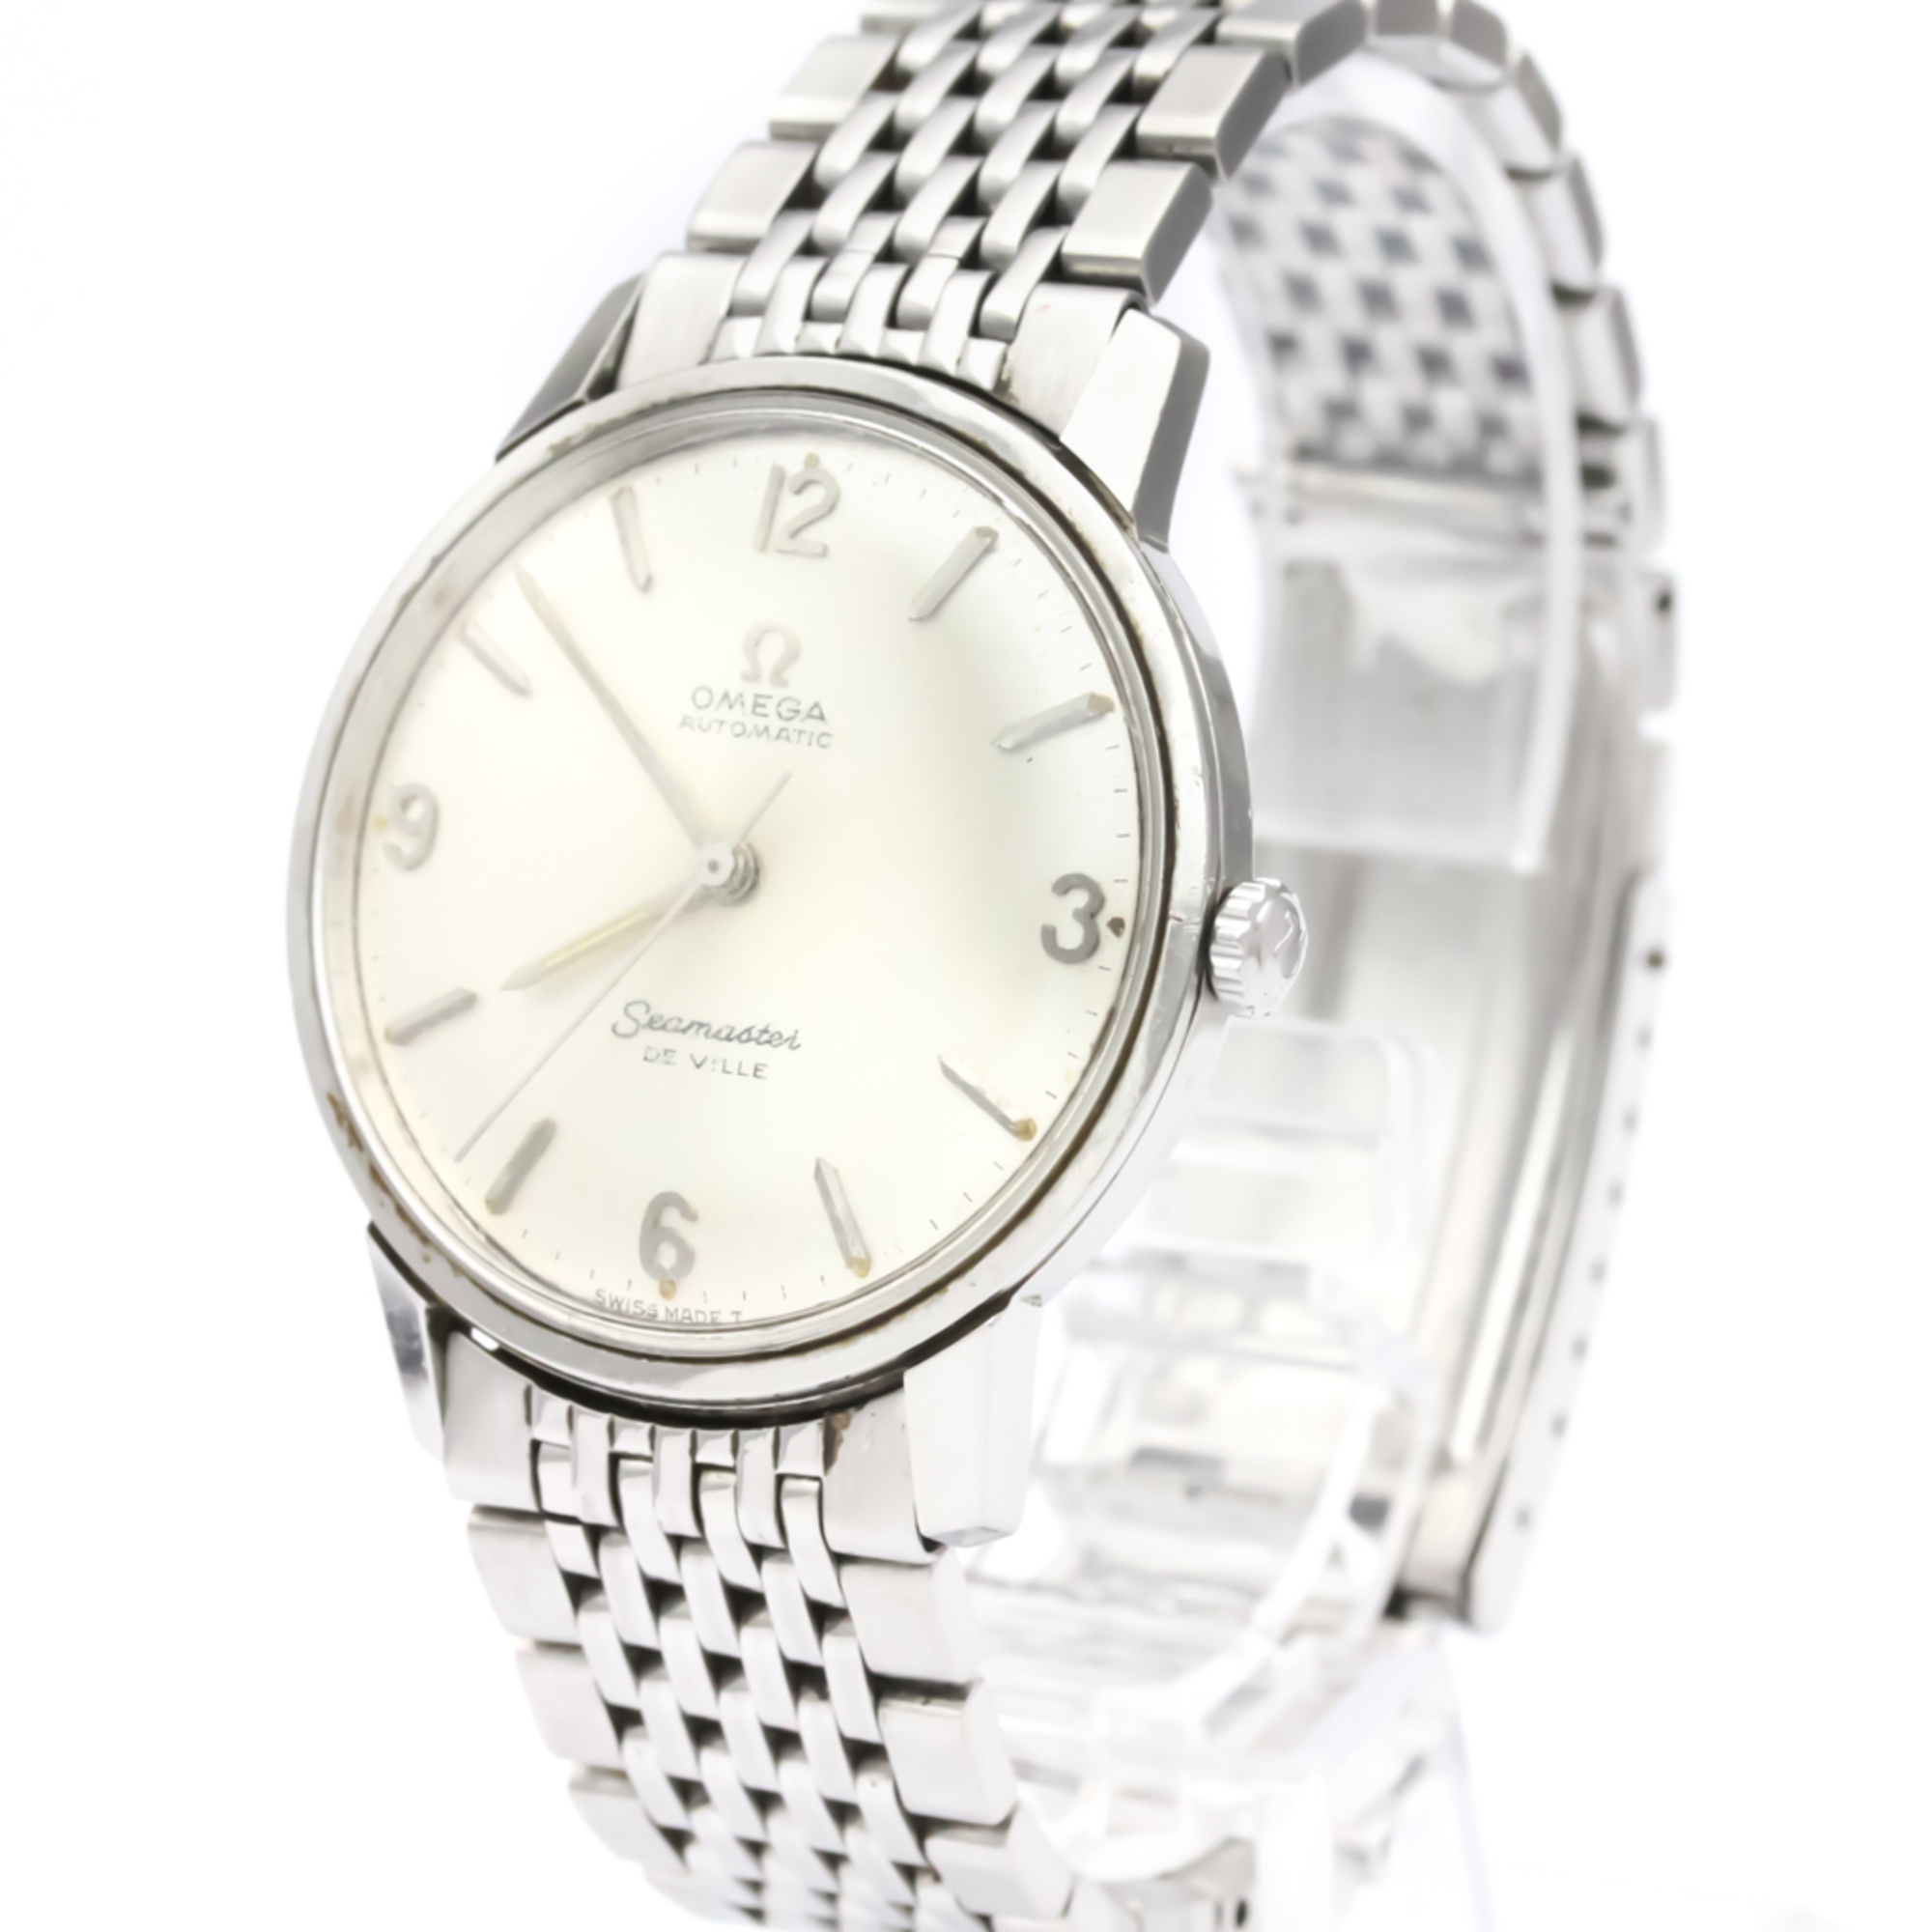 Omega Seamaster Automatic Stainless Steel Men's Dress Watch 165.002